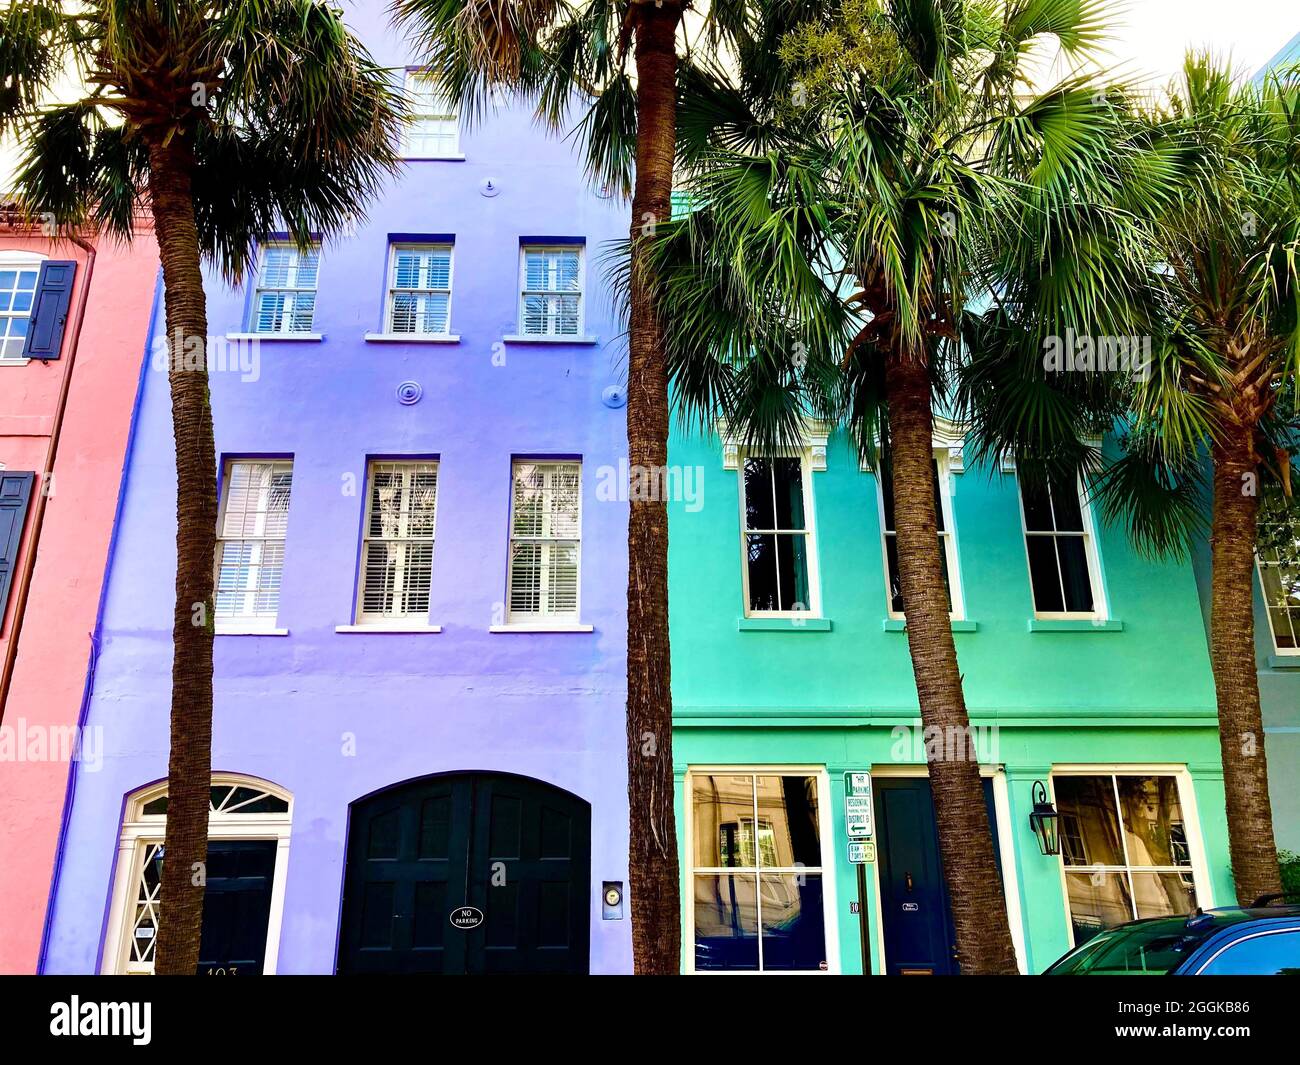 Charleston, South Carolina, Rainbow Row is a series of 13 colorul historical houses located at East Bay Street. It represents the longest cluster of Georgian row houses in the USA. The name Rainbow Row was coined after pastel colors they were painted during restoration in 1930s. UNESCO World Heritage Site bid came short. Stock Photo